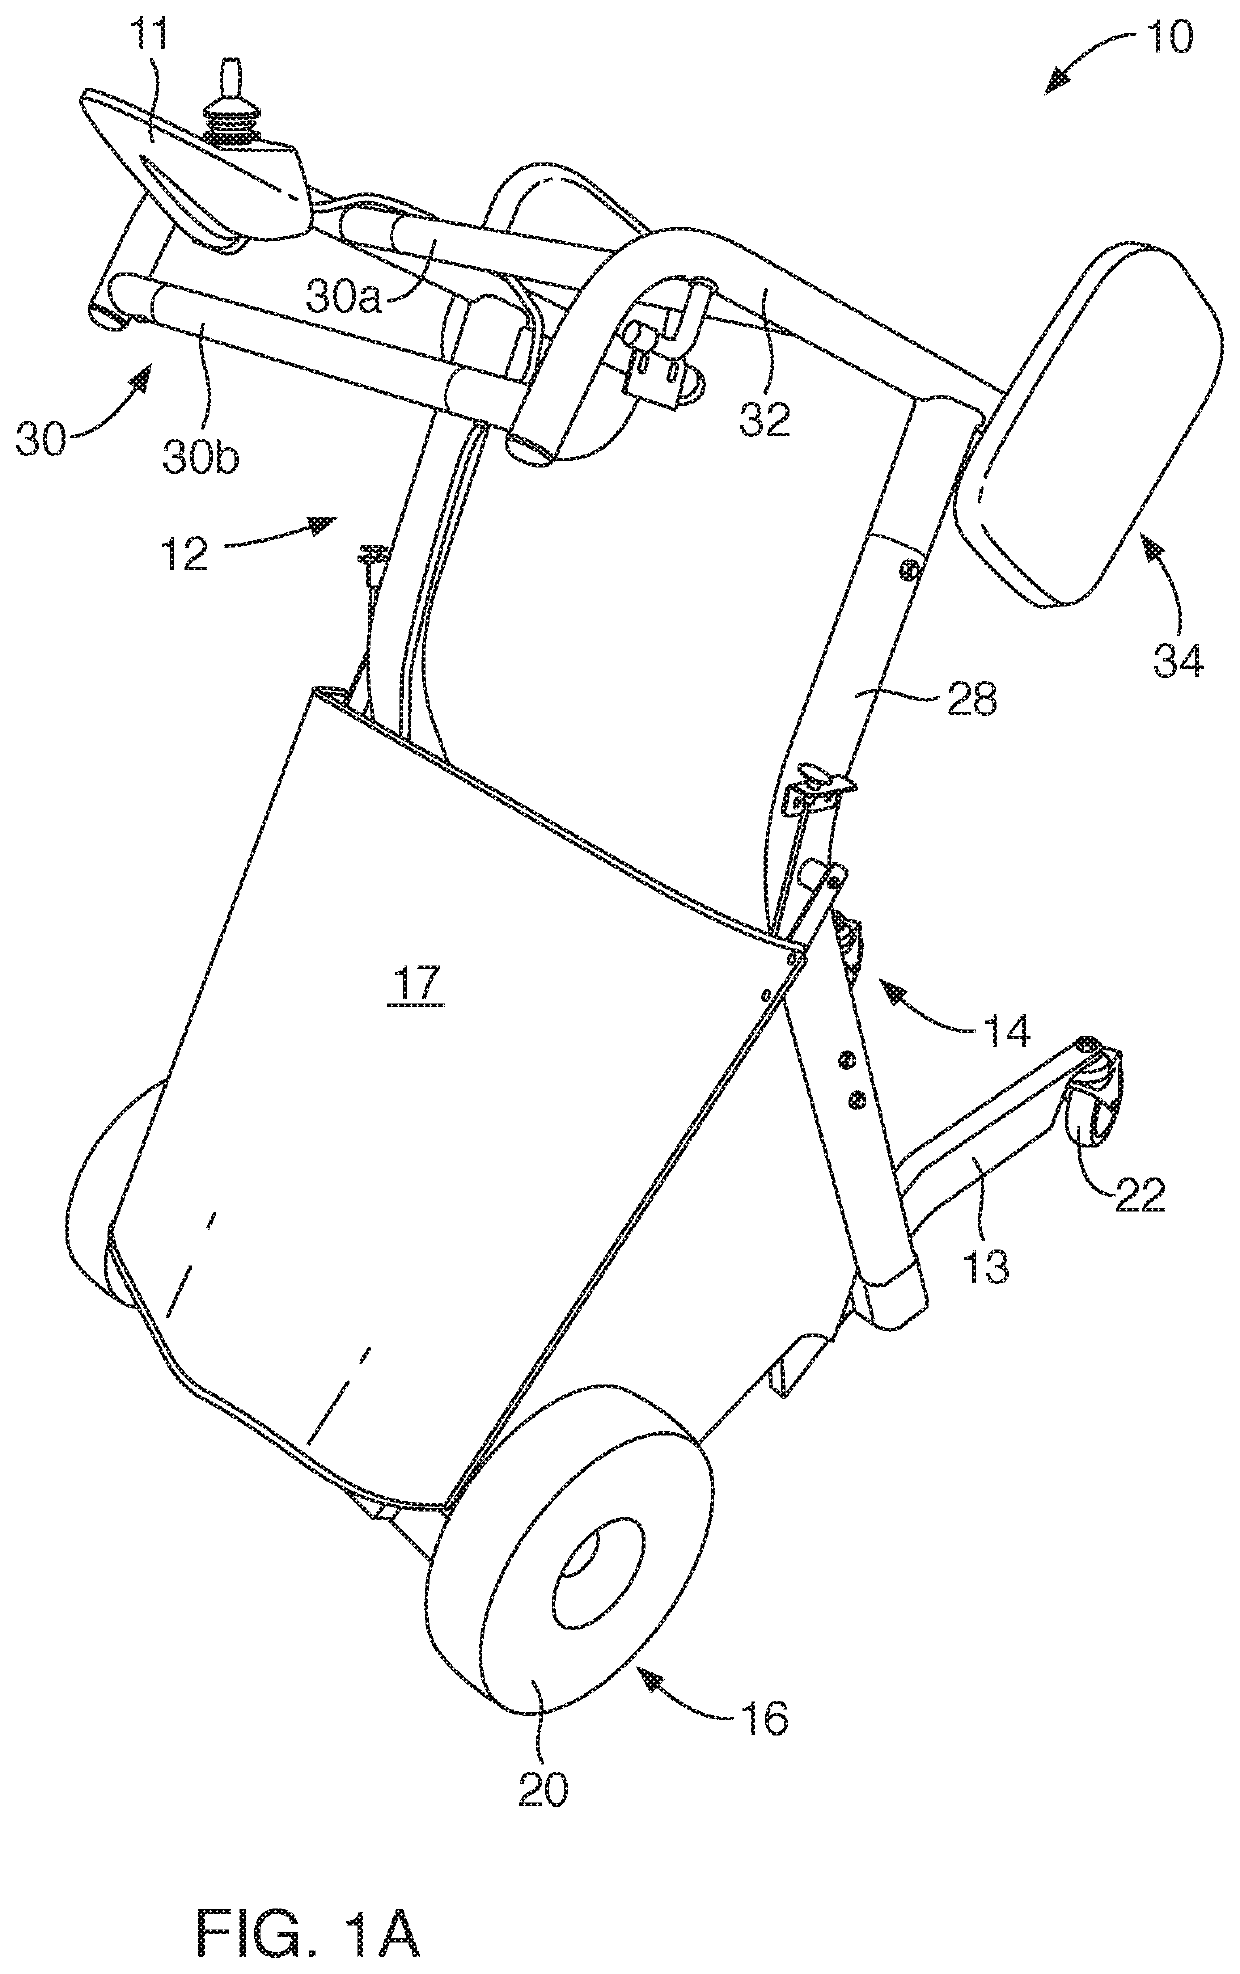 Exercising, mobility transporter apparatus and method